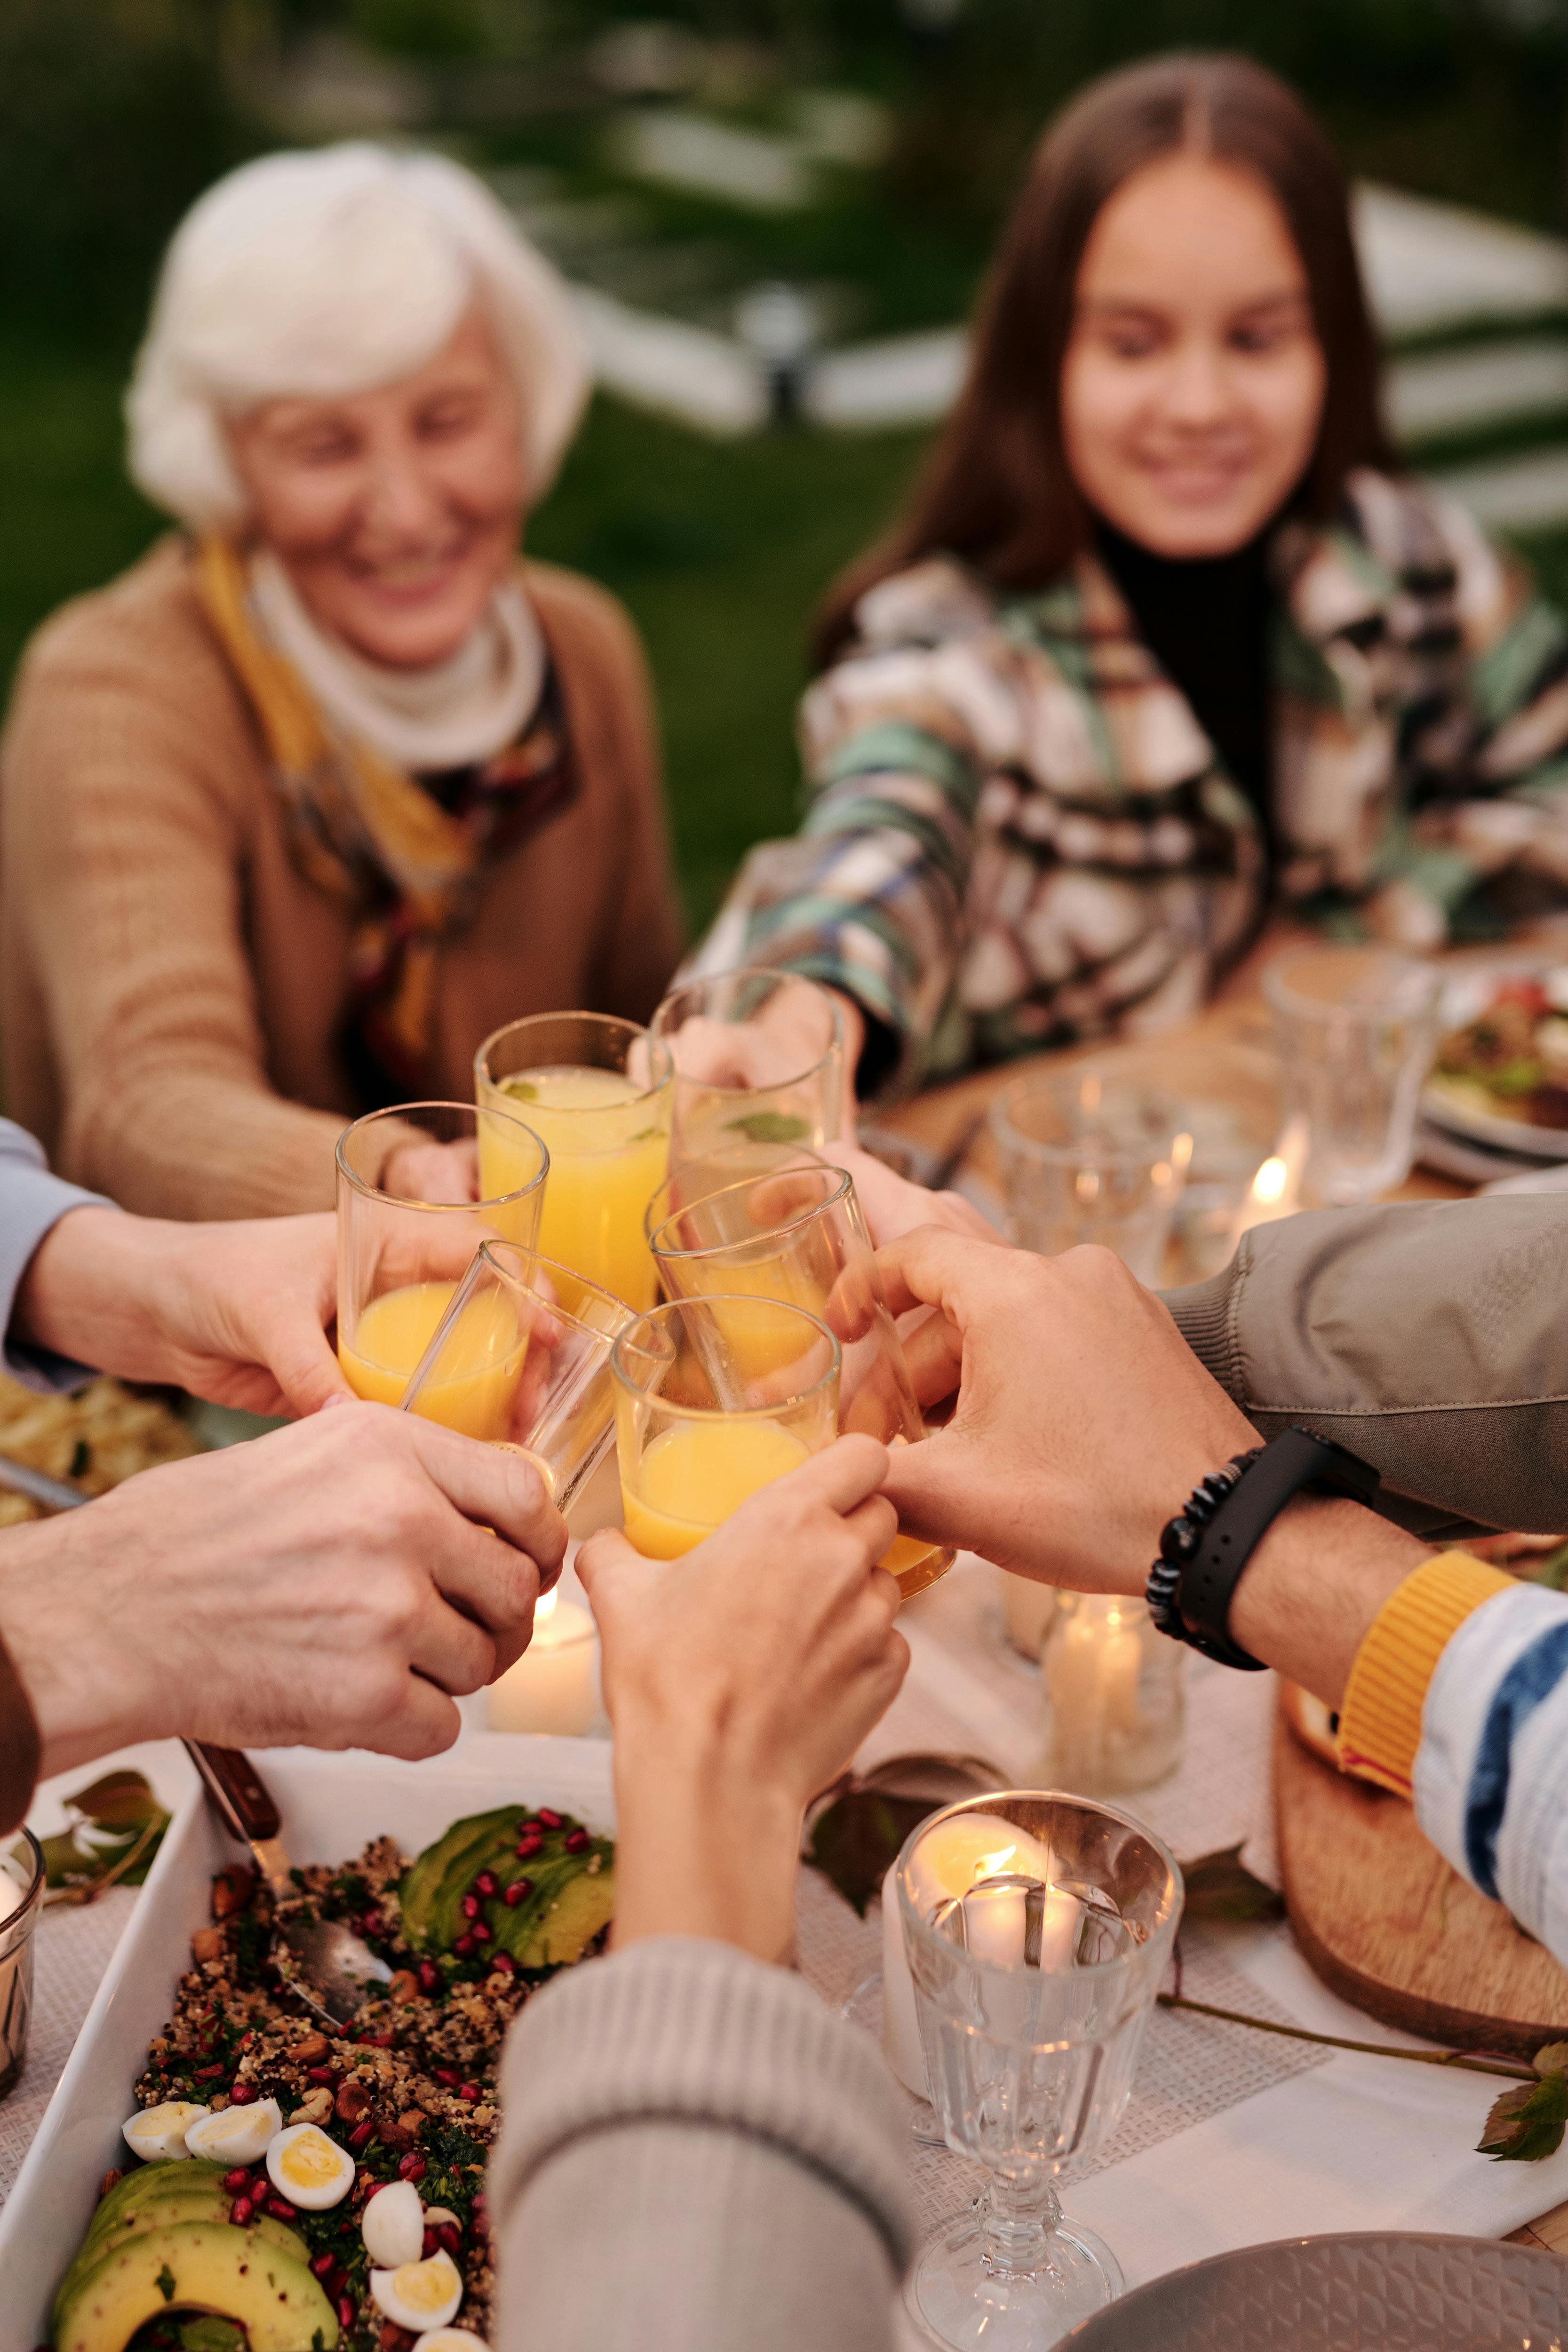 People toasting at a birthday party | Source: Pexels